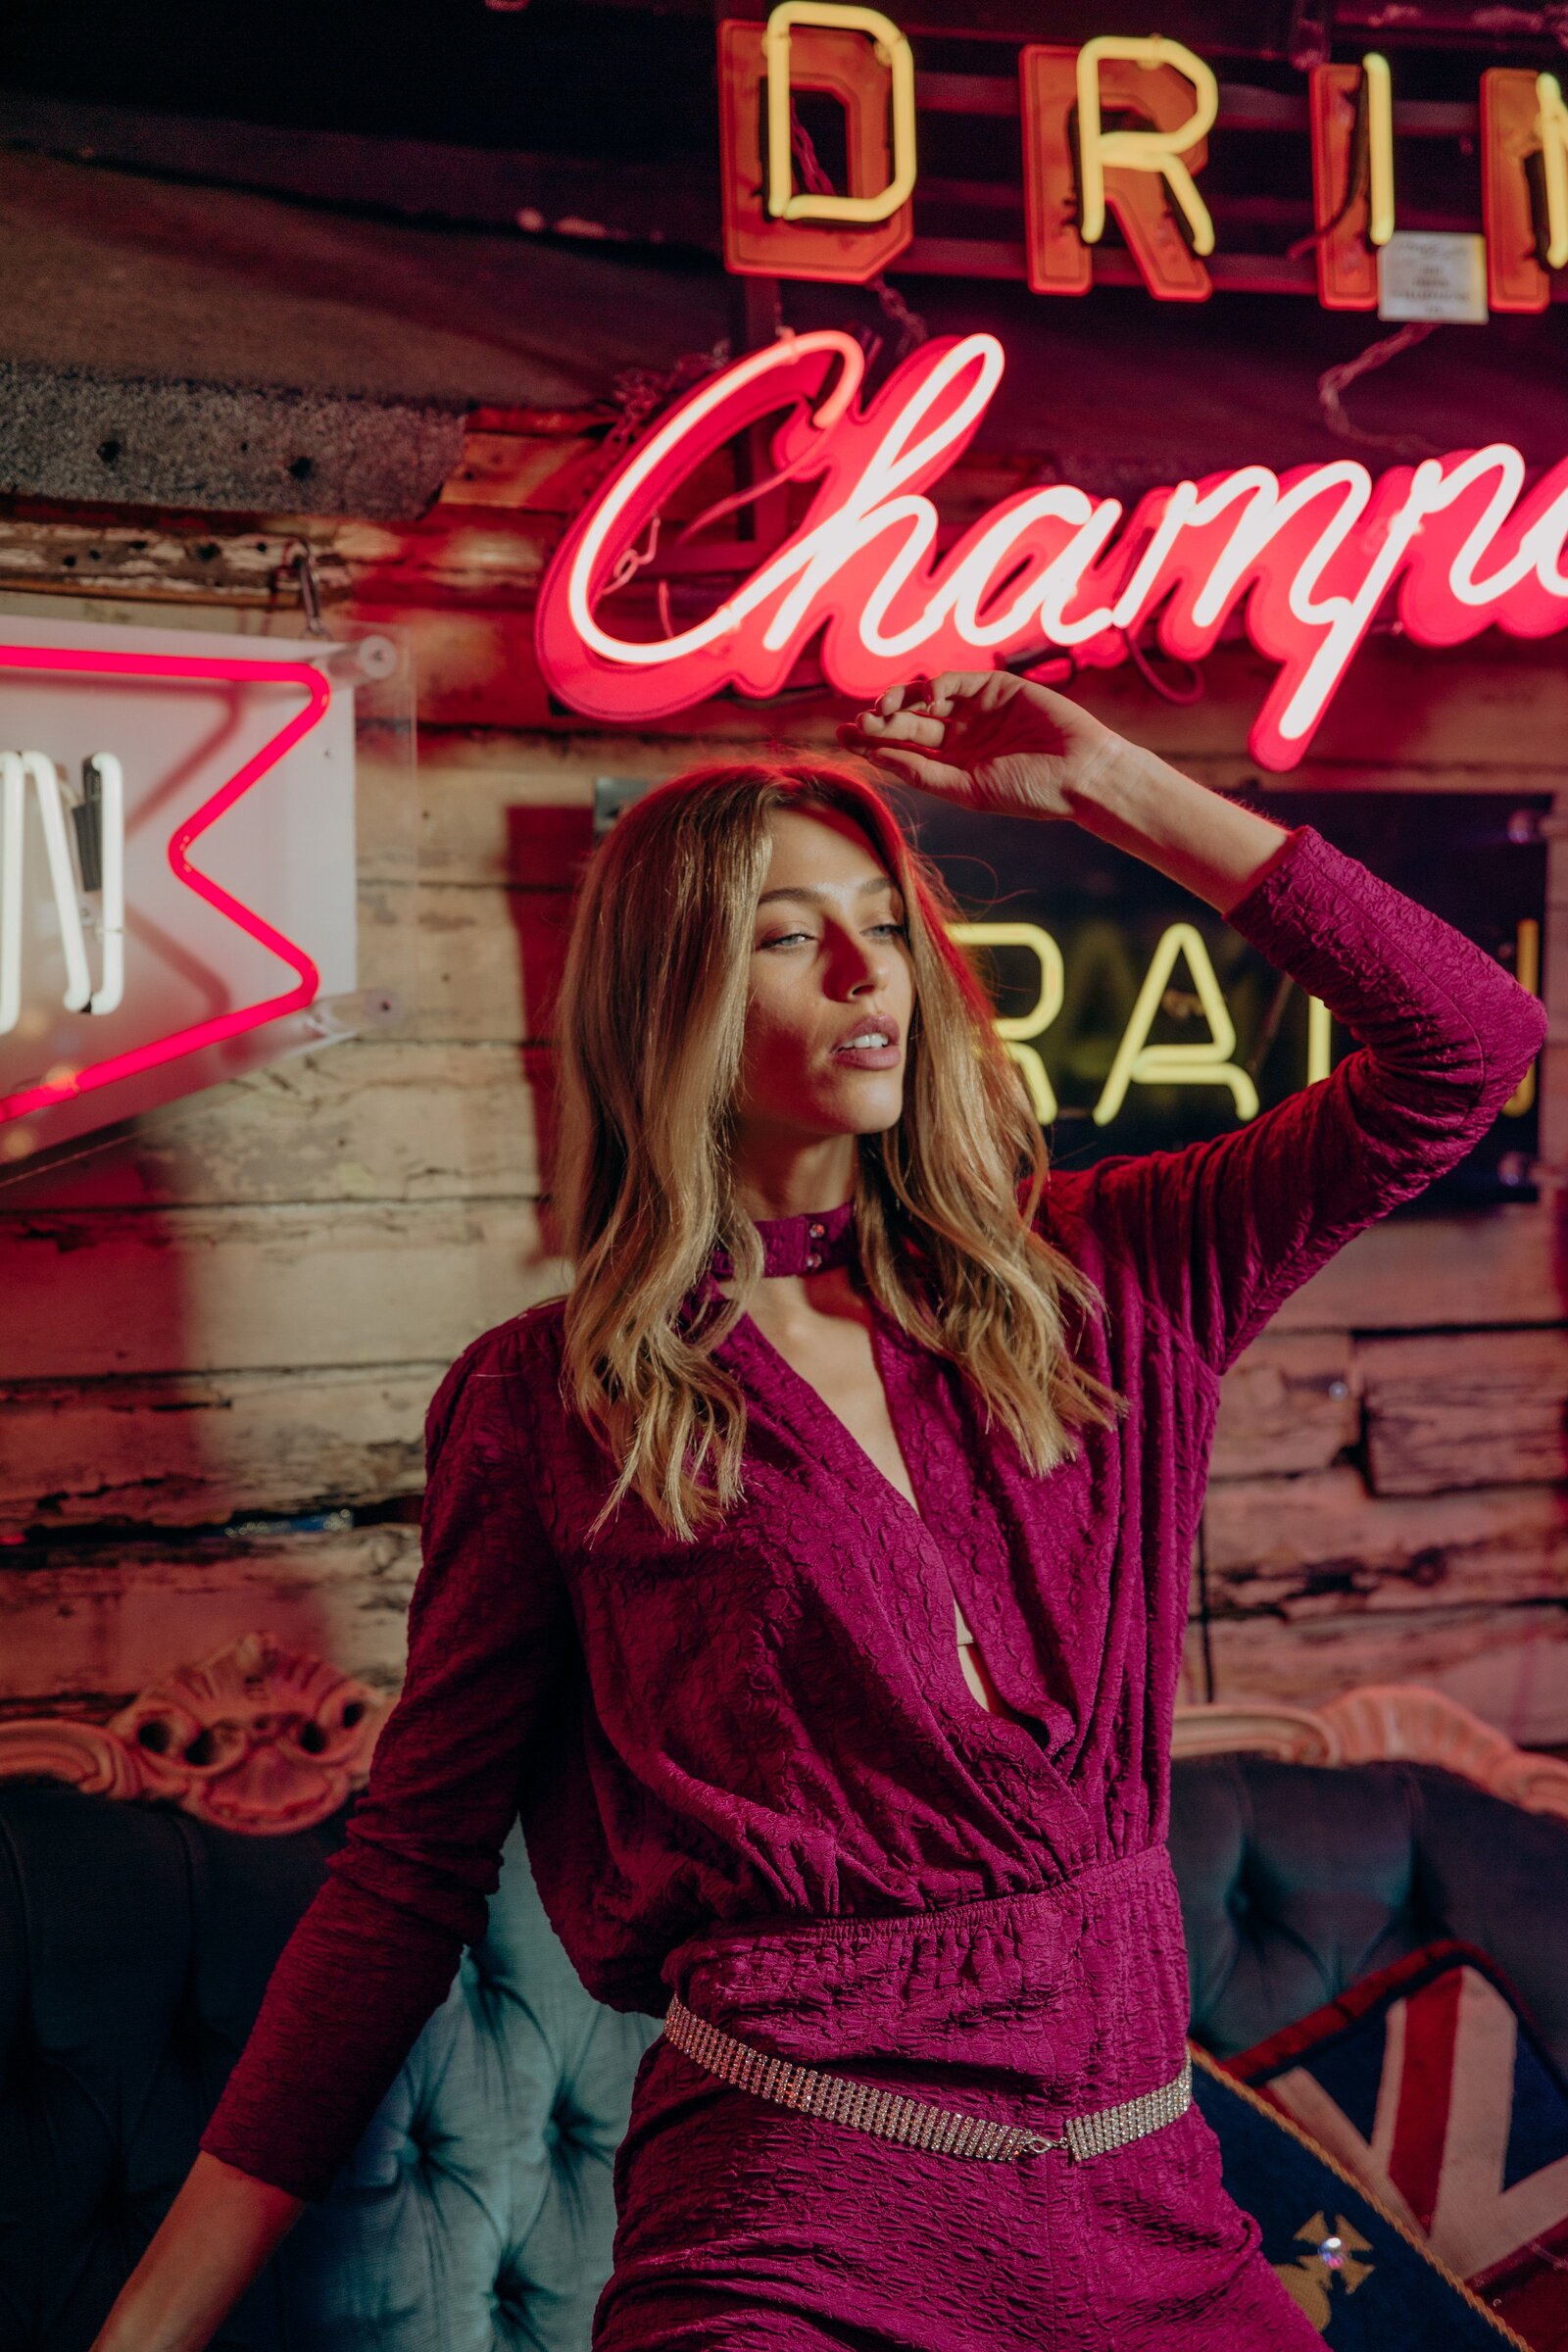 Anastazja wearing a pink jumpsuit kneeling on a blue sofa surrounded by neon signs.